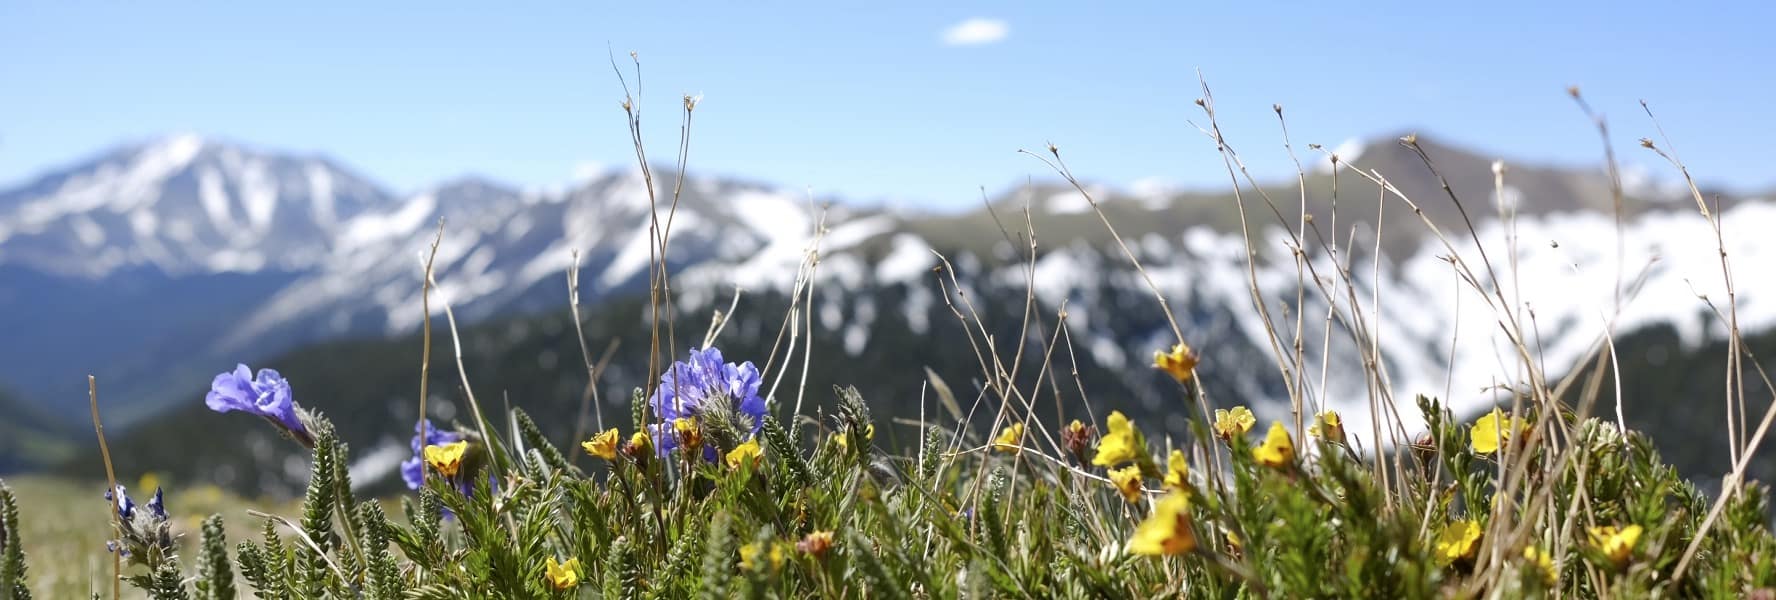 Alpine meadow in bloom with a stunning backdrop of snow-capped mountains under a clear blue sky.